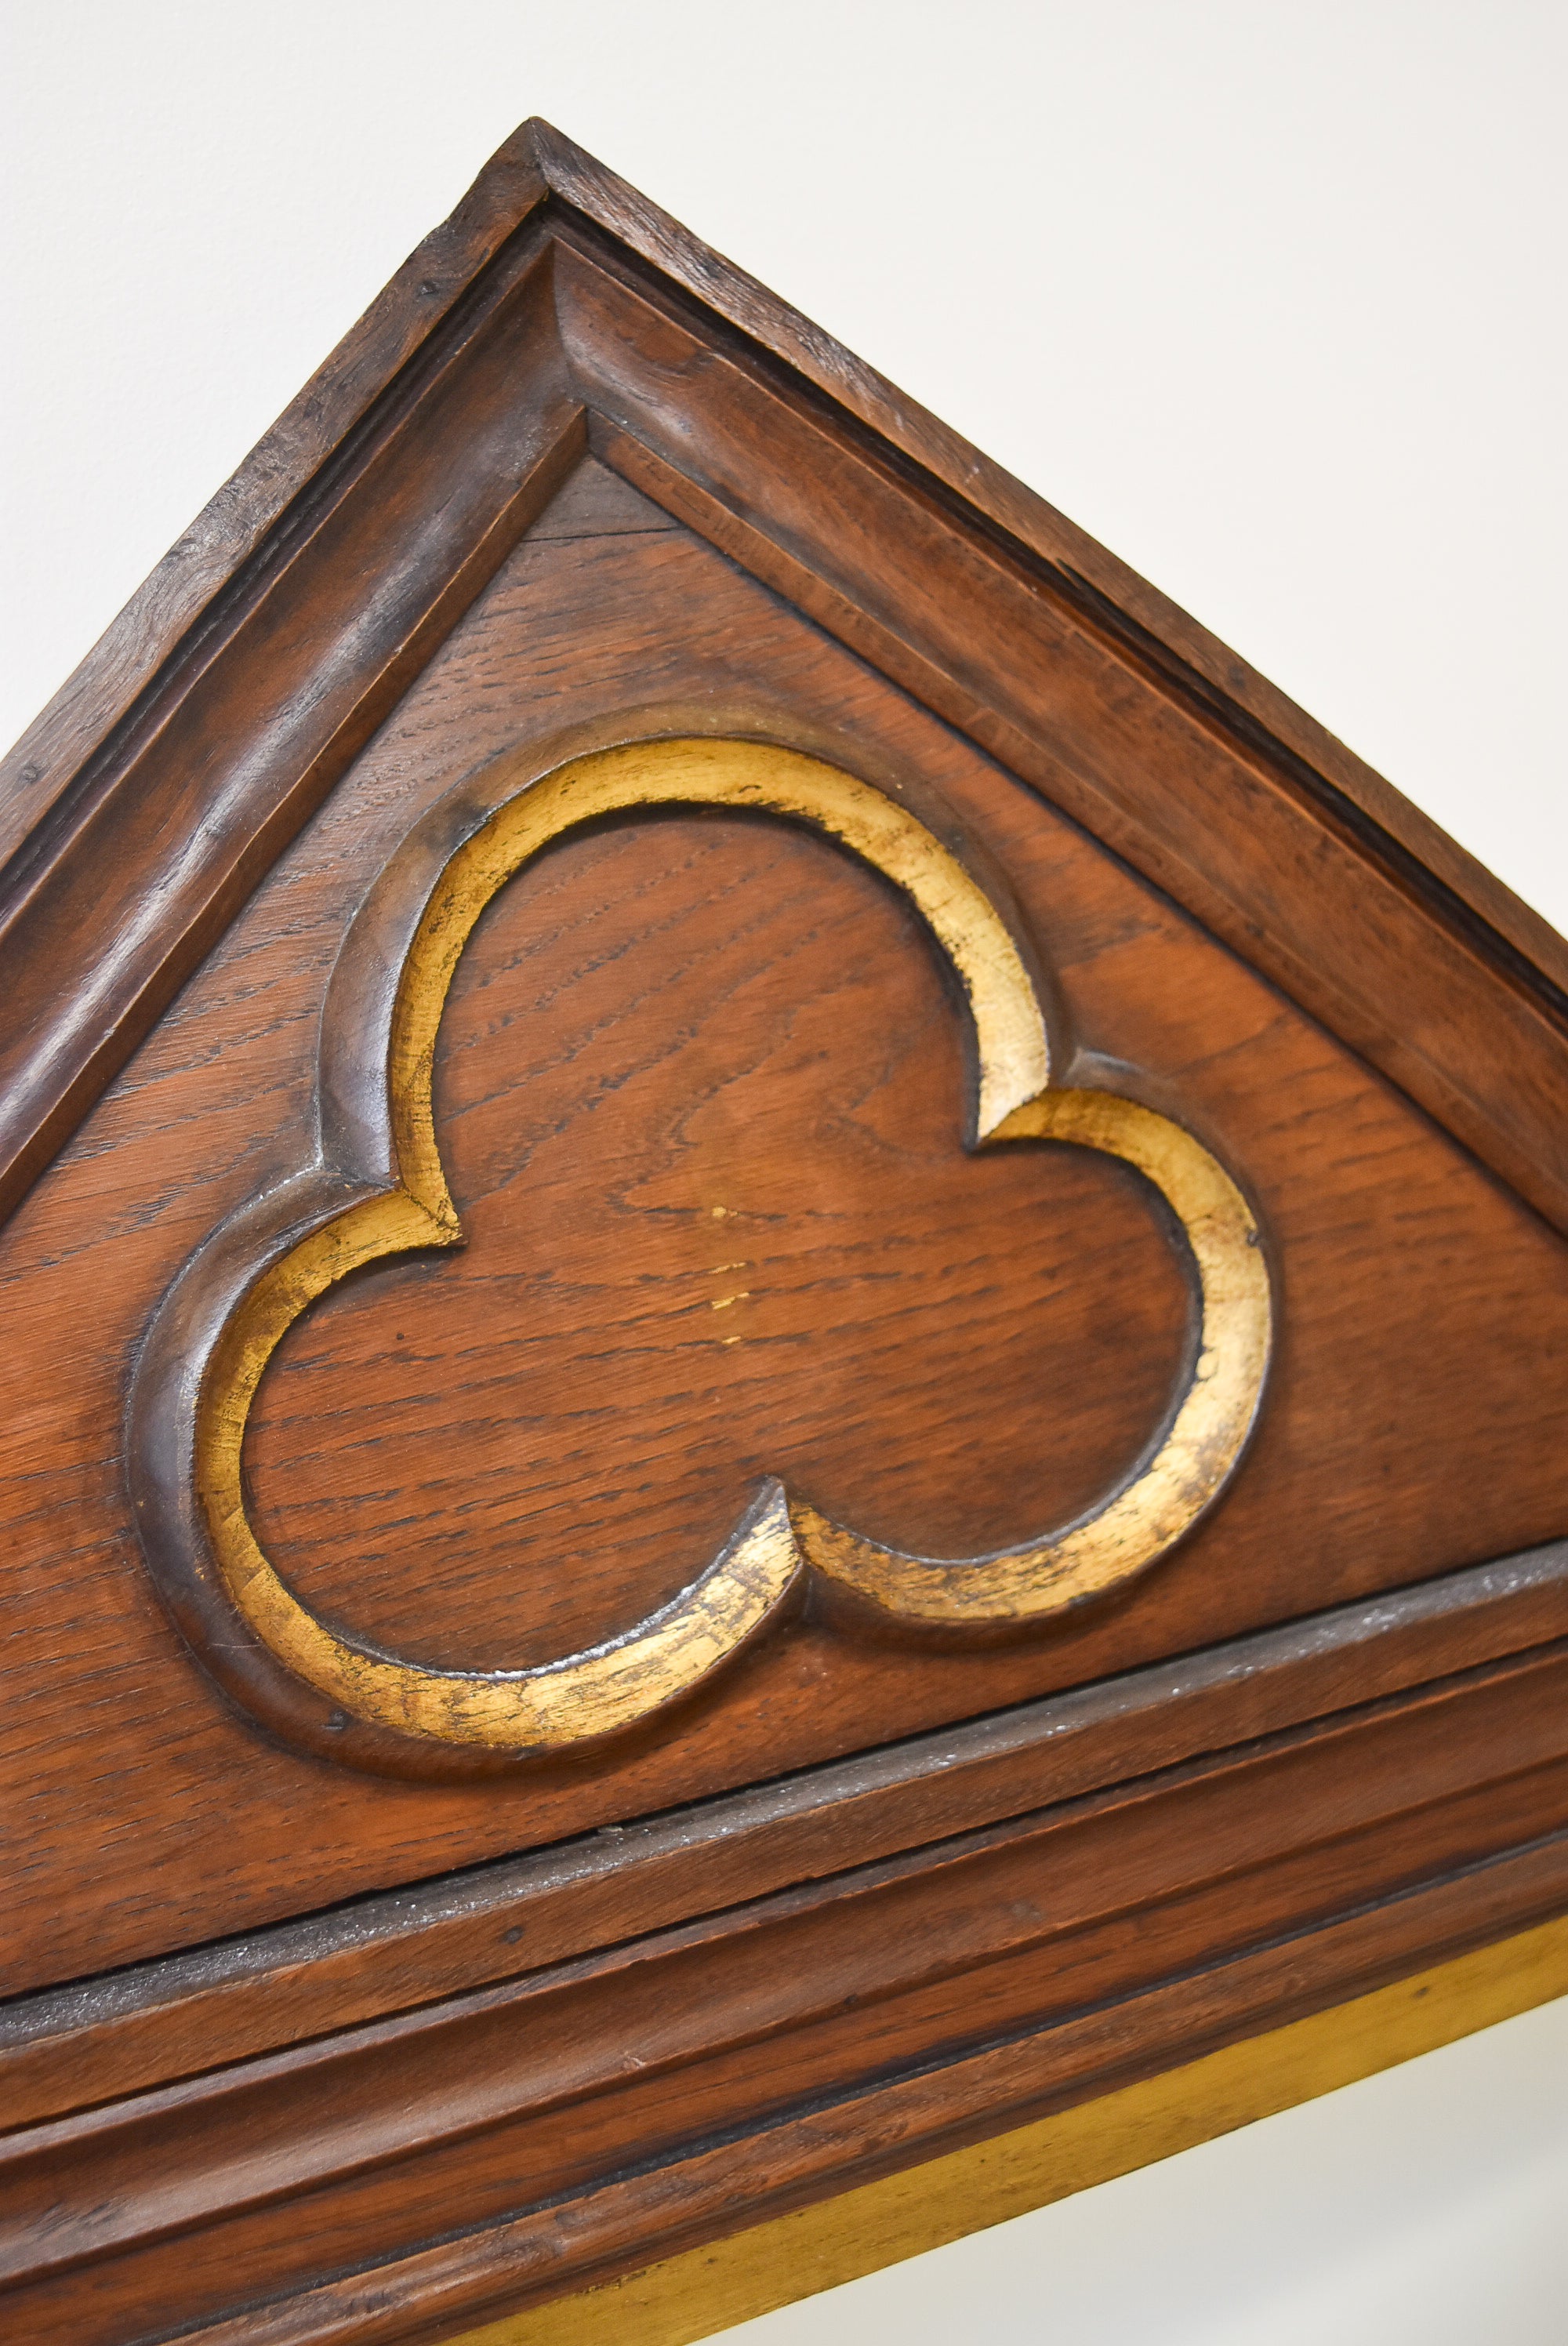 English Oak Mirror with Trefoil Design and Gilt Accents